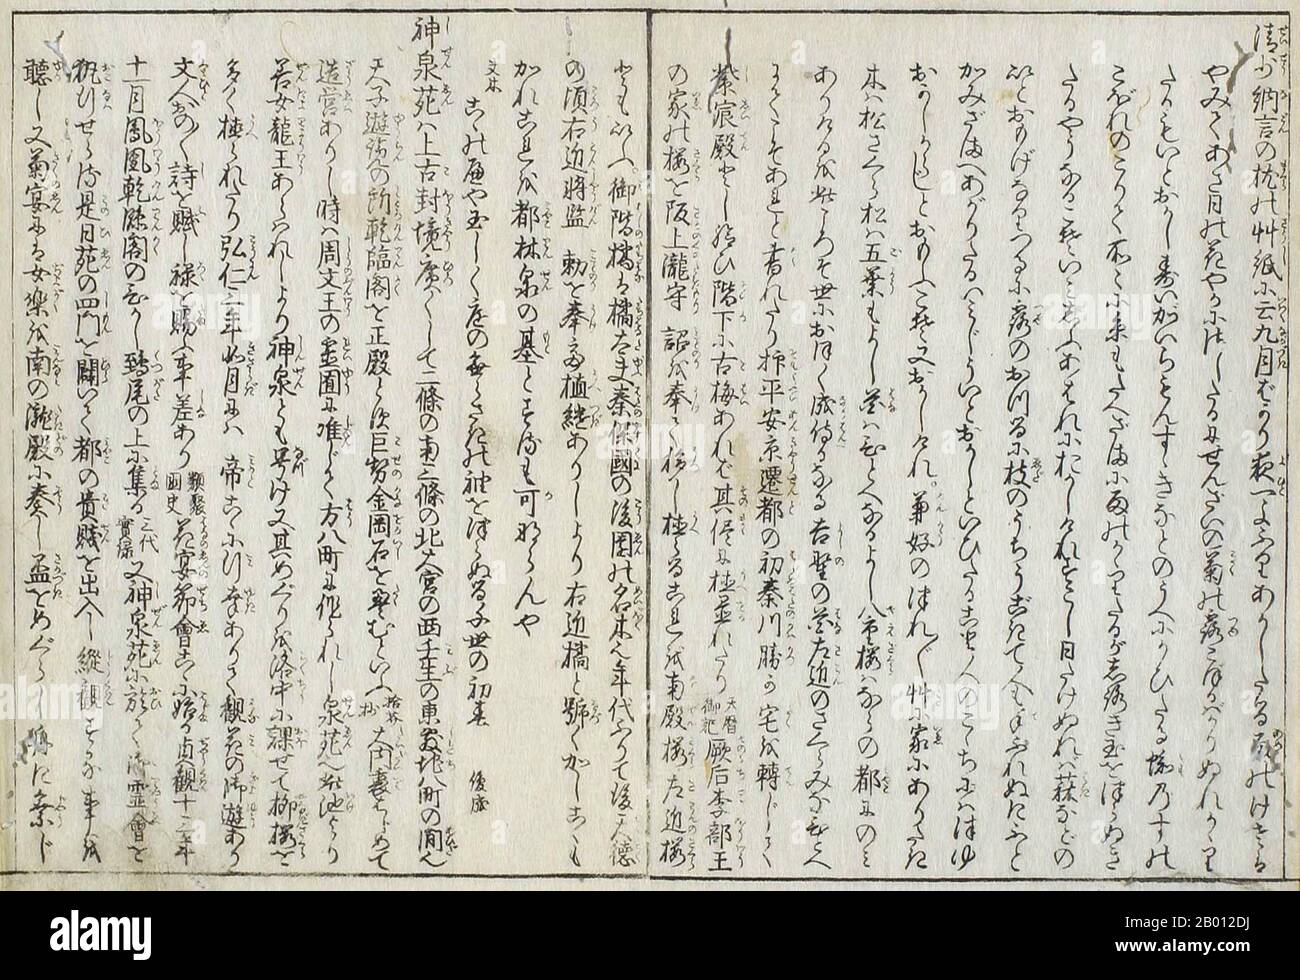 Japan: Handwritten Japanese text from the 12th century Makura no Soshi or 'The Pillow Book' of Heian court lady and celebrated writer Sei Shonagon.  Sei Shonagon (c. 966-1017) was a Japanese author and a court lady who served the Empress Teishi (Empress Sadako) around the year 1000 during the middle Heian period, and is best known as the author of The Pillow Book 'Makura no Soshi'. She achieved fame through her work The Pillow Book, a collection of lists, gossip, poetry, observations, complaints and anything else she found of interest during her years in the court. Stock Photo